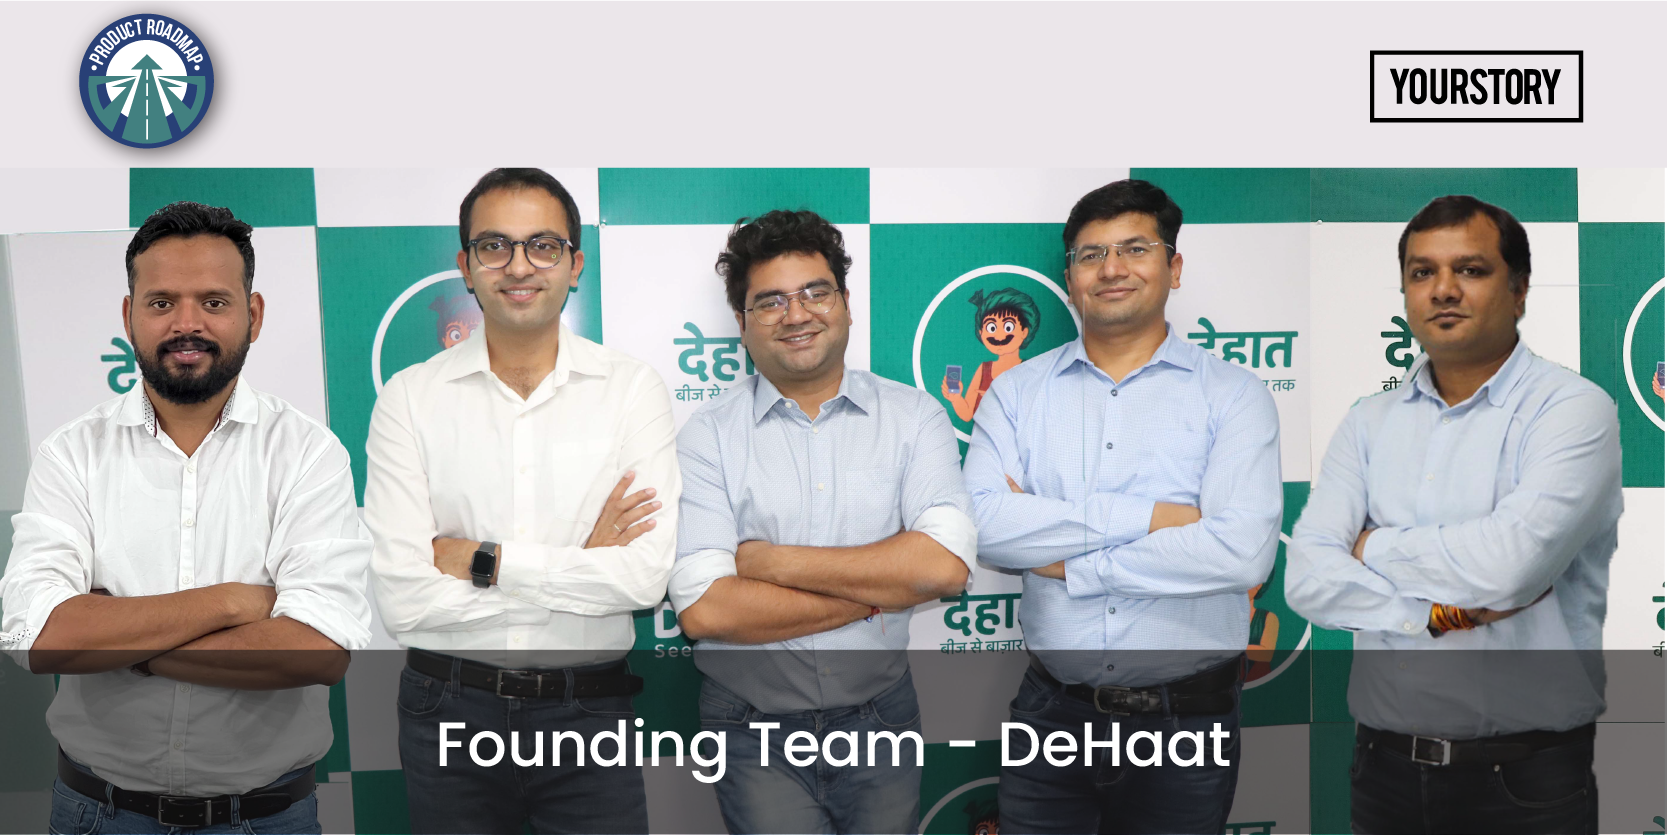 [Product Roadmap] How DeHaat has helped 650,000 farmers across India increase crop yield with technology 